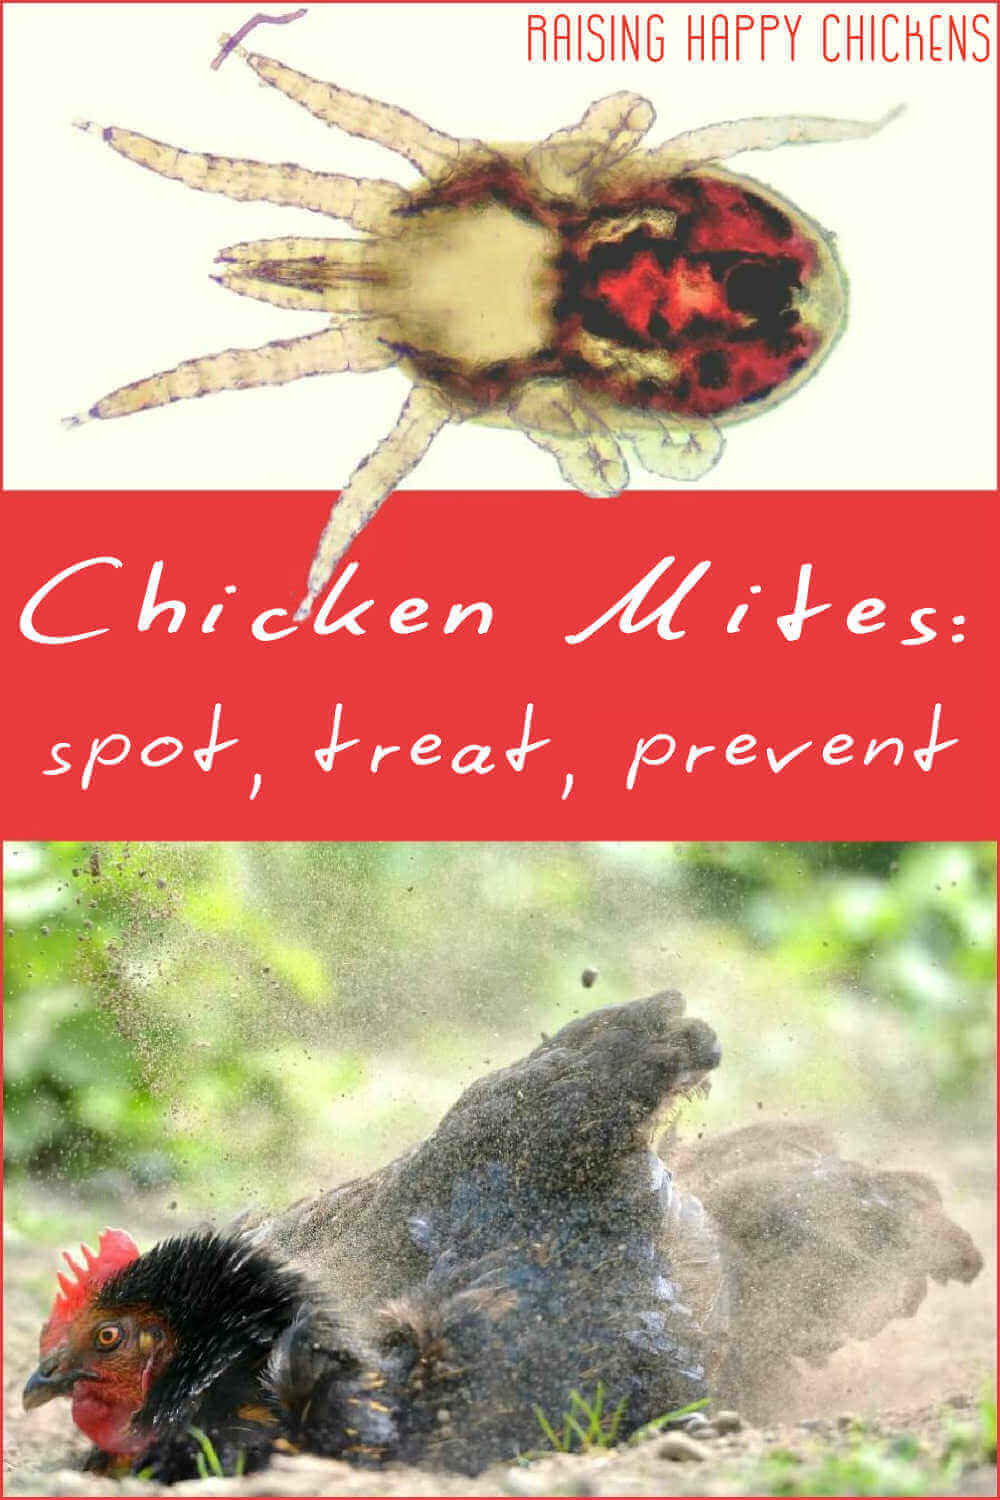 Chicken how to spot, treat and prevent.